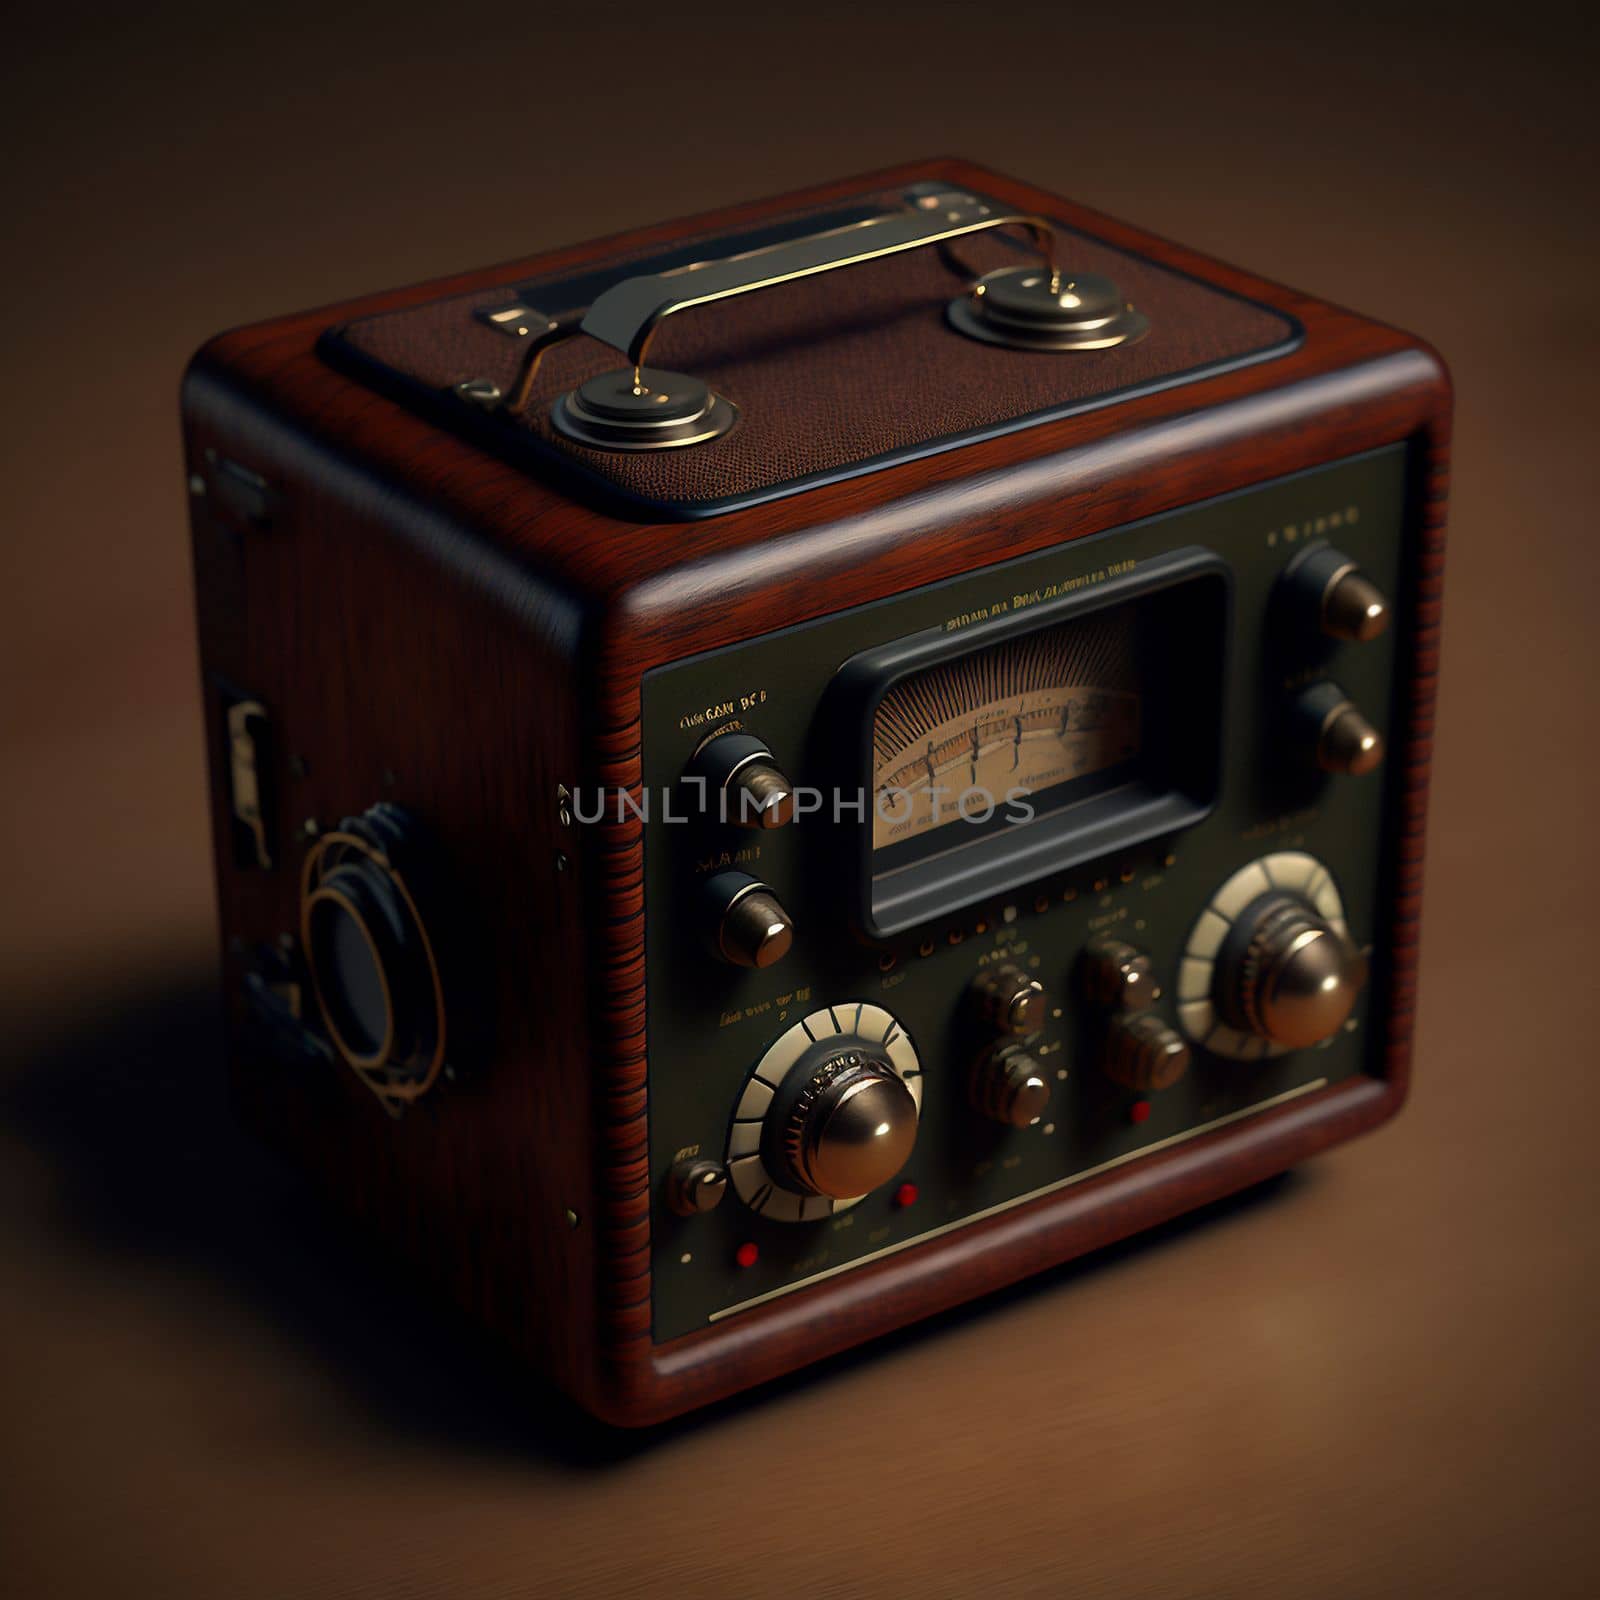 A non-existent model of a vintage audio player by NeuroSky